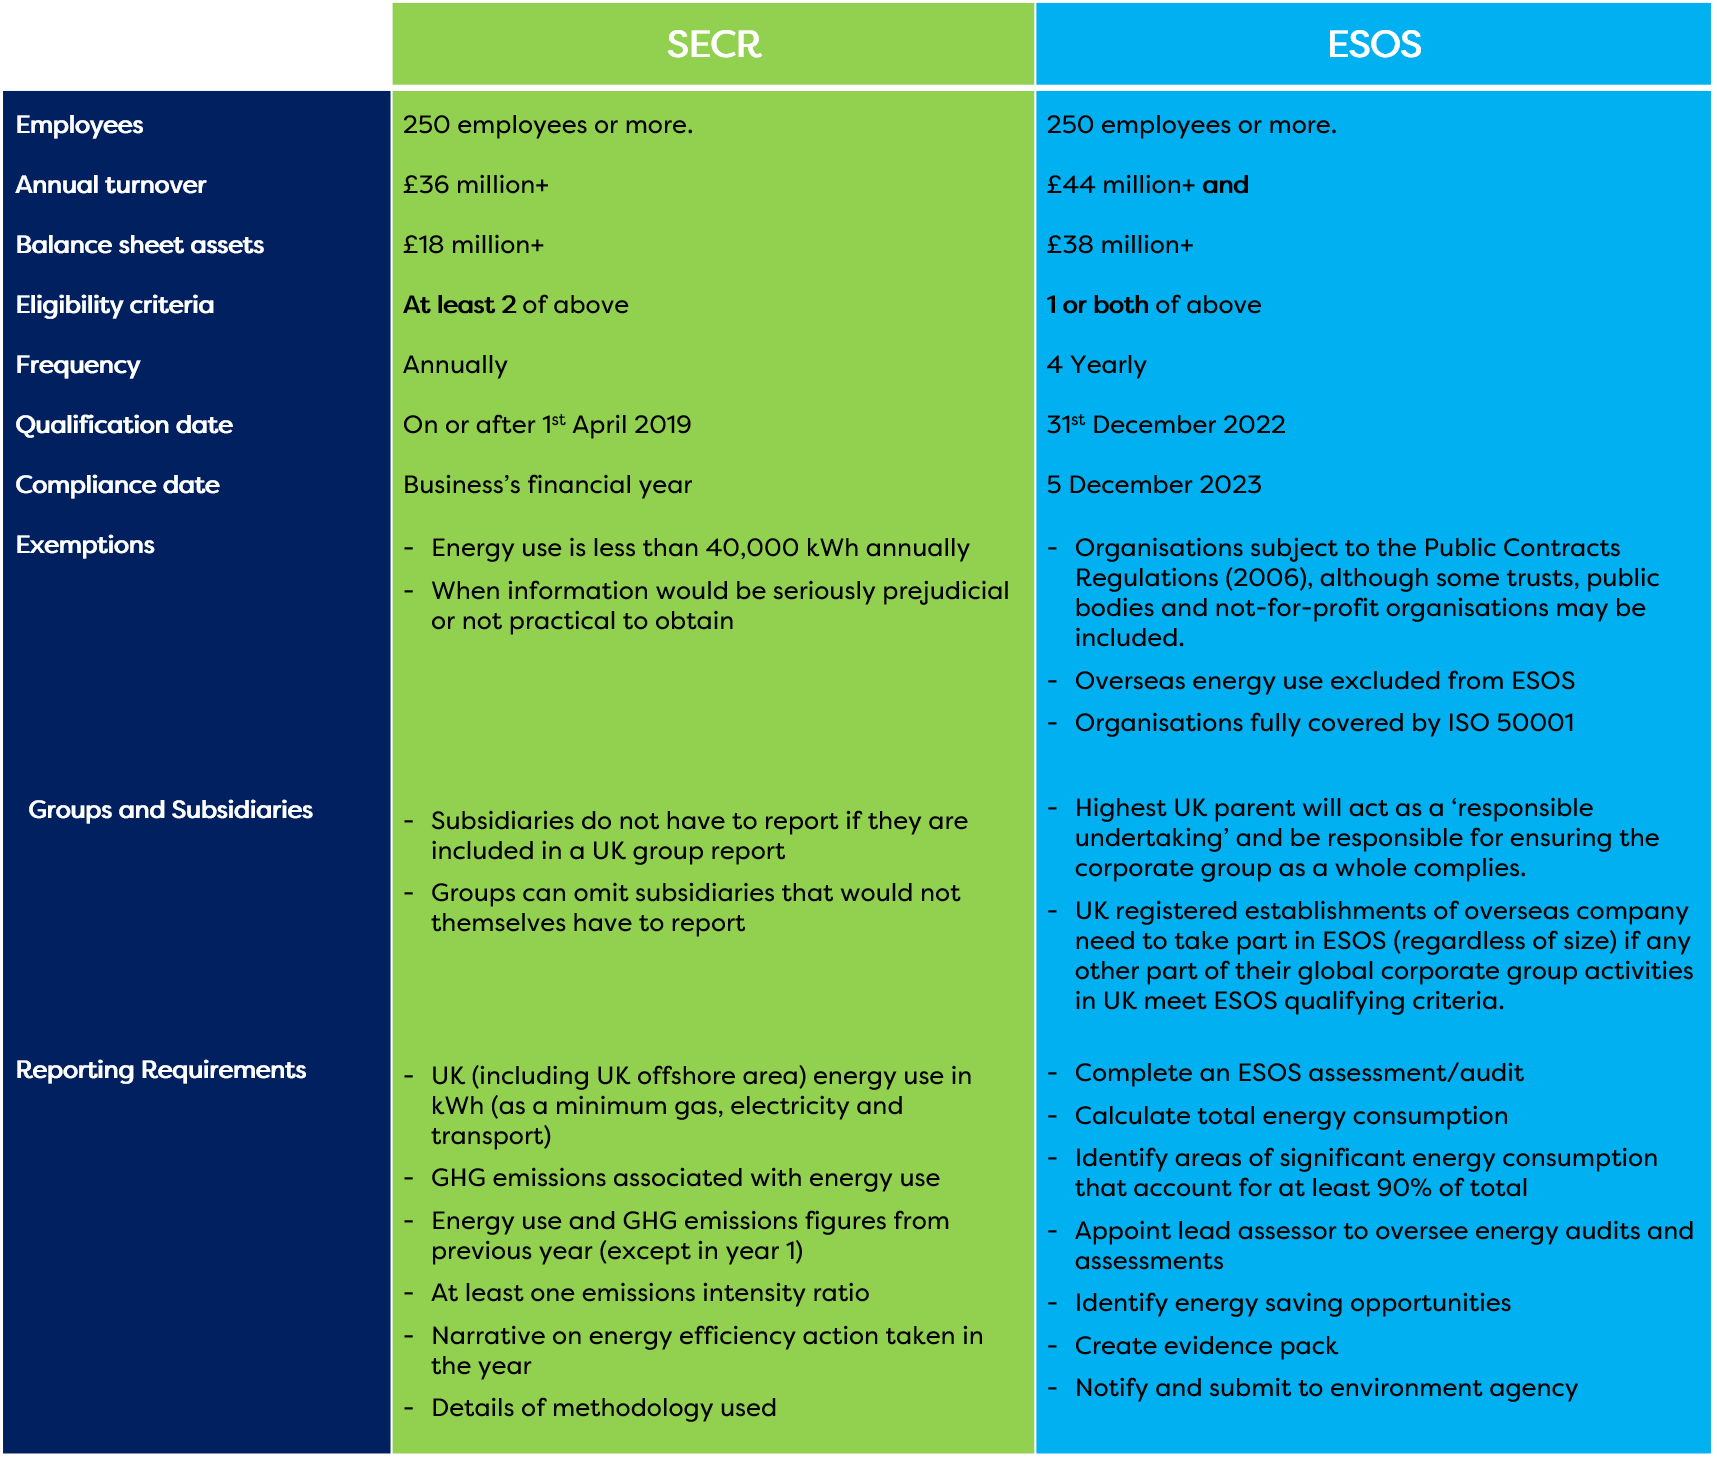 SECR and ESOS - Scheme differences